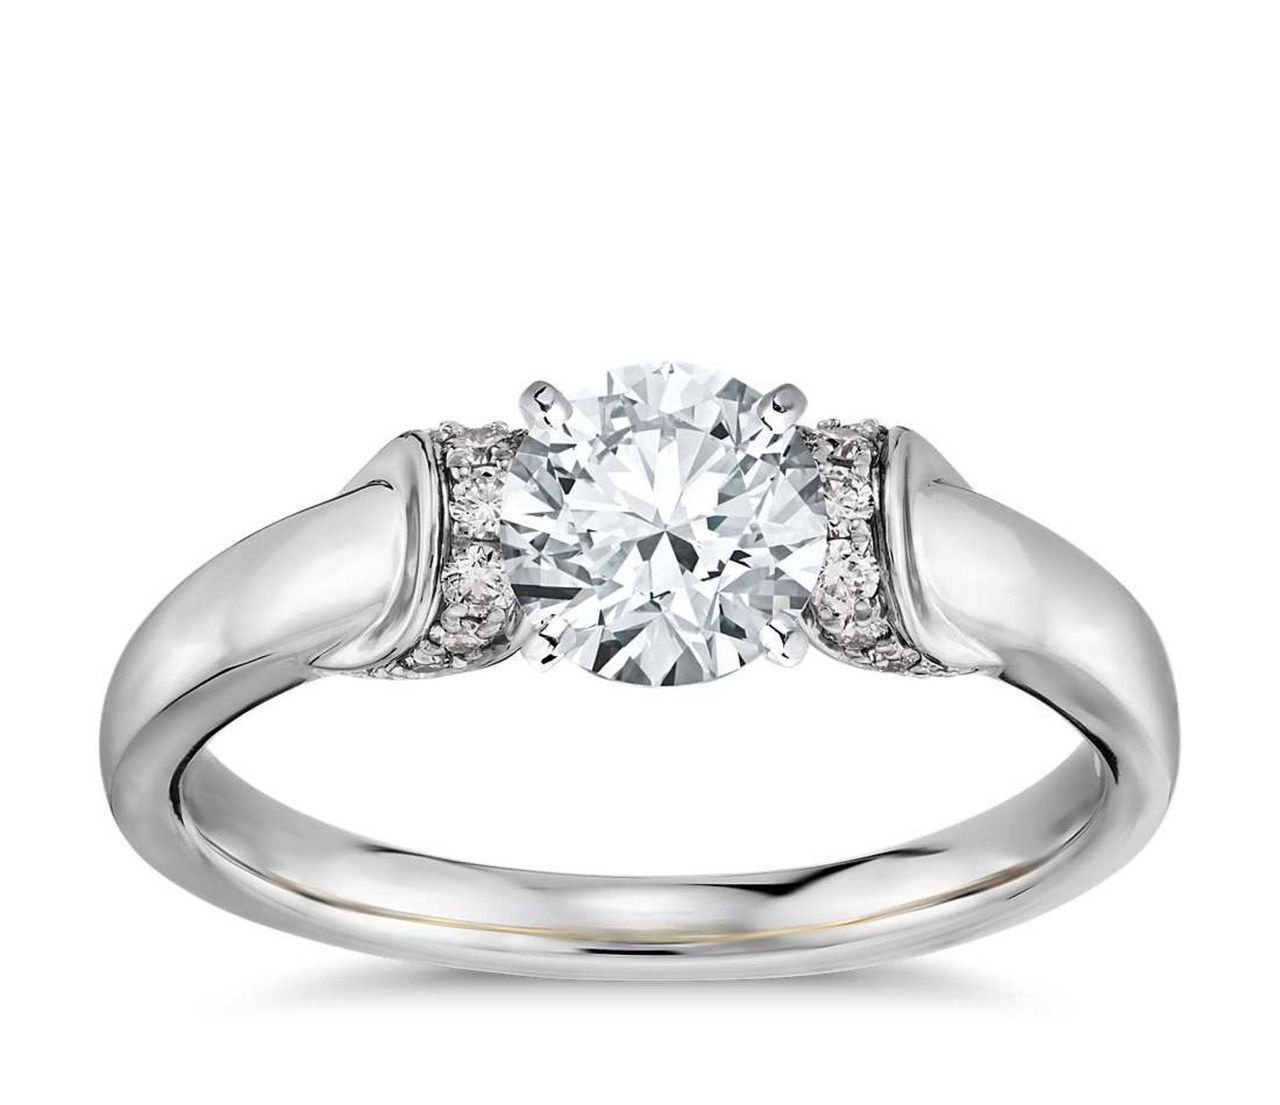 2 best new engagement rings trends 2015 0108 courtesy